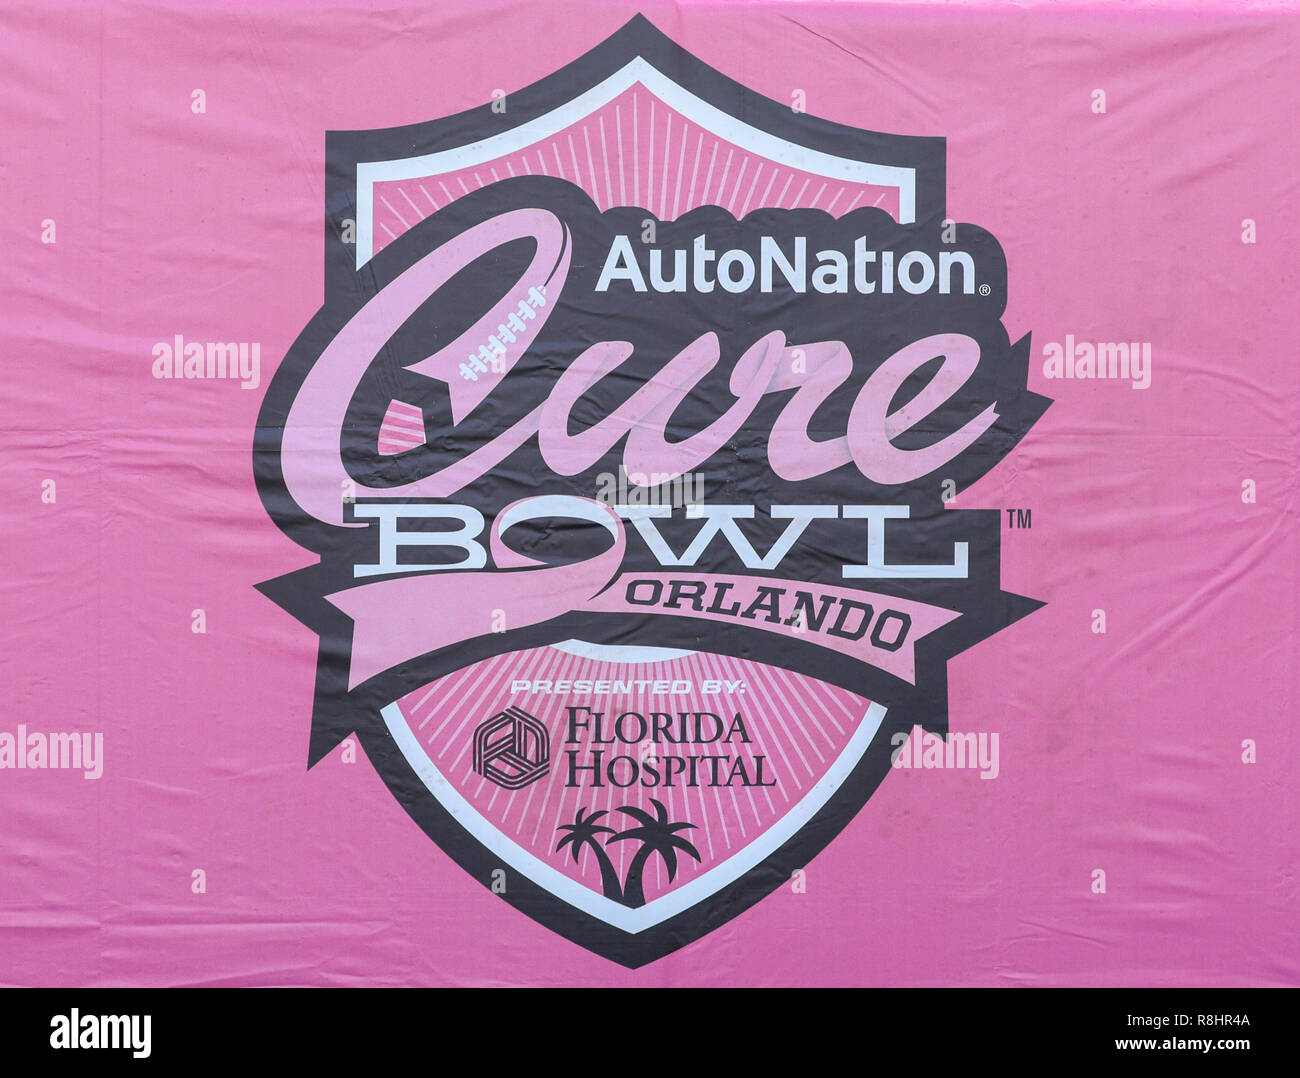 Orlando, Florida, USA. 15th Dec, 2018. The insignia for the AutoNation Cure Bowl game between the Louisiana Ragin' Cajuns and the Tulane Green Wave at Camping World Stadium in Orlando, Florida. Kyle Okita/CSM/Alamy Live News Stock Photo